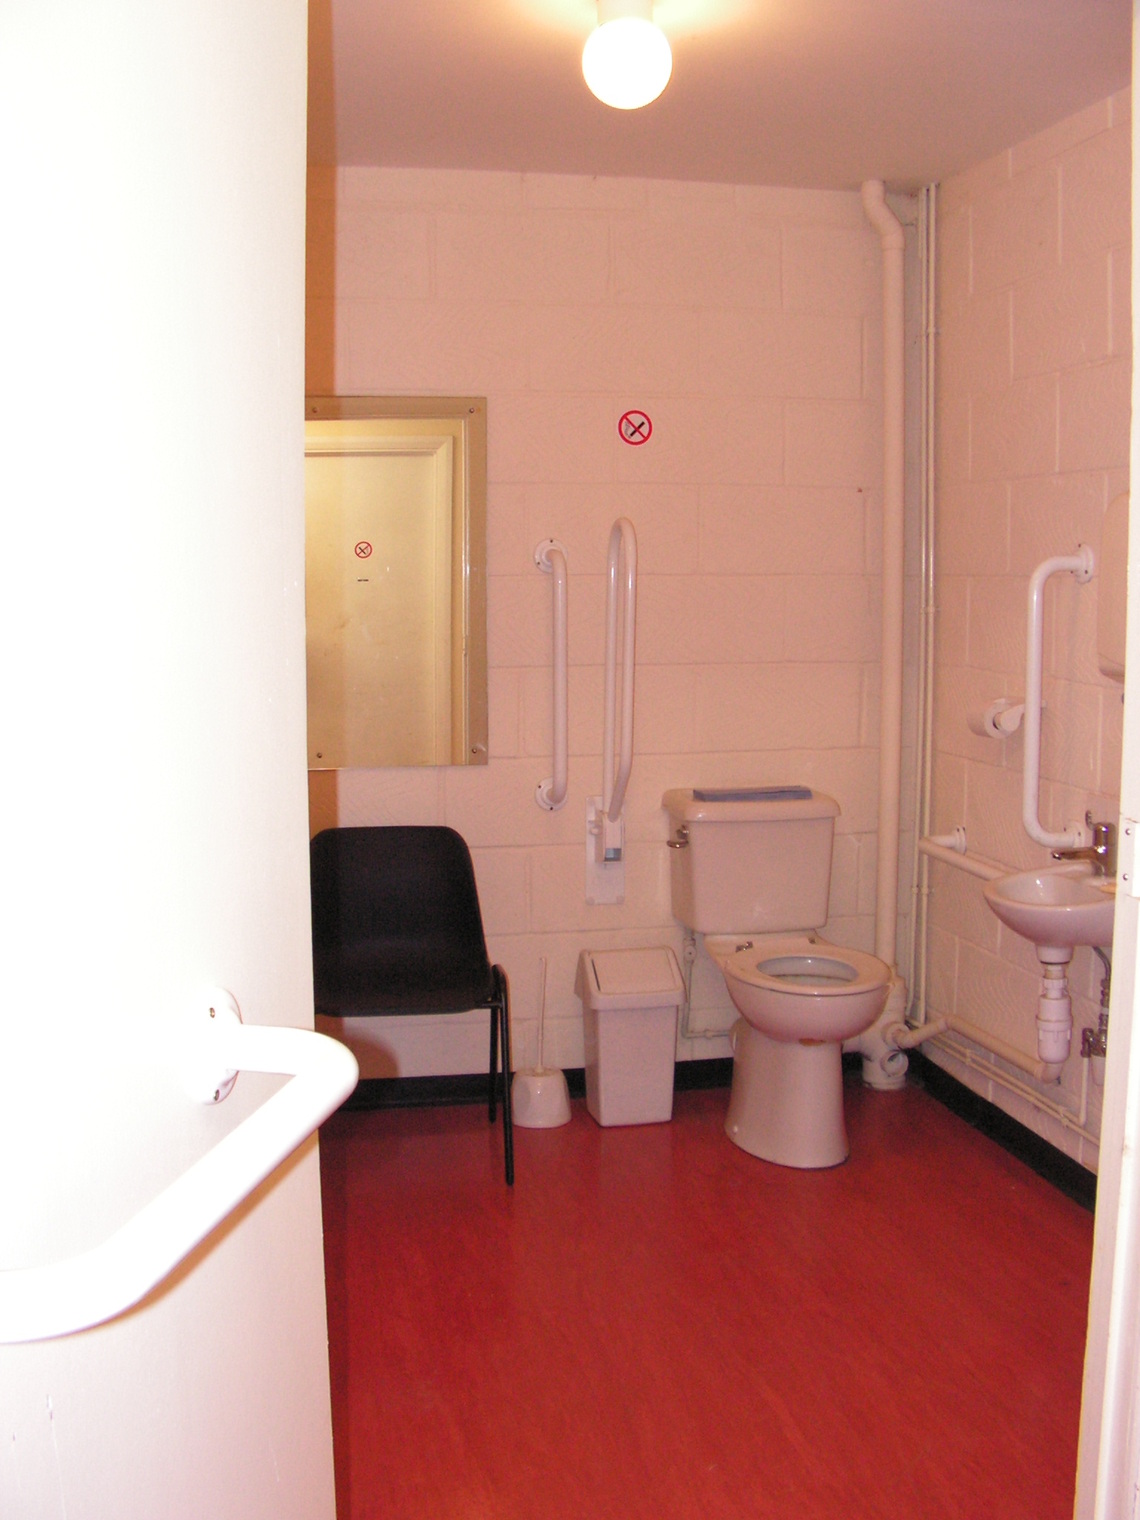 disabled toilet cubicle